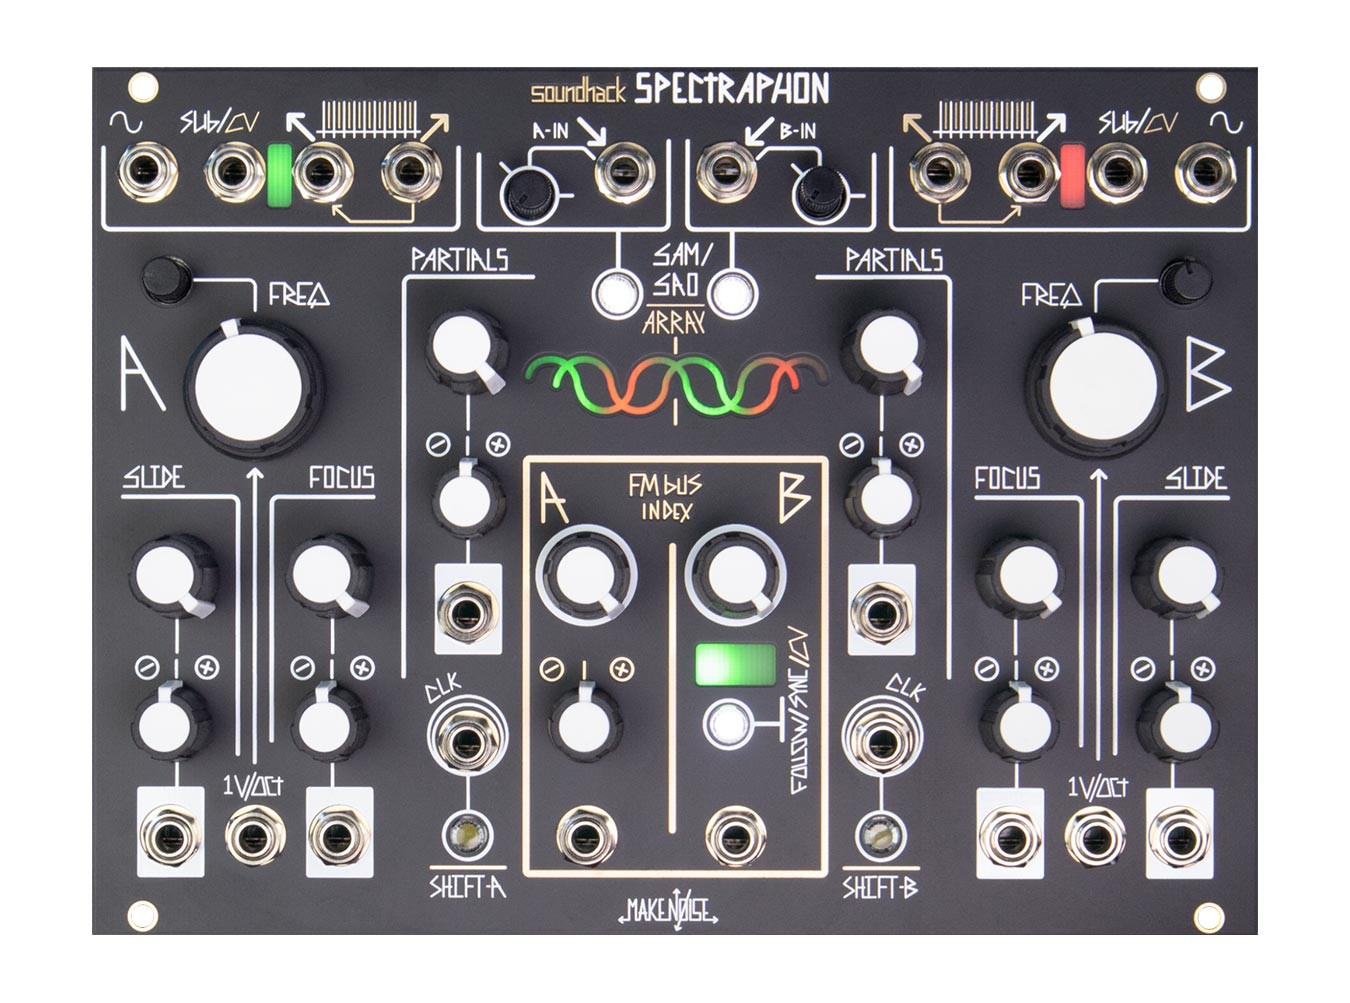 Make Noise Soundhack Spectraphon Dual Spectral Oscillator Review 